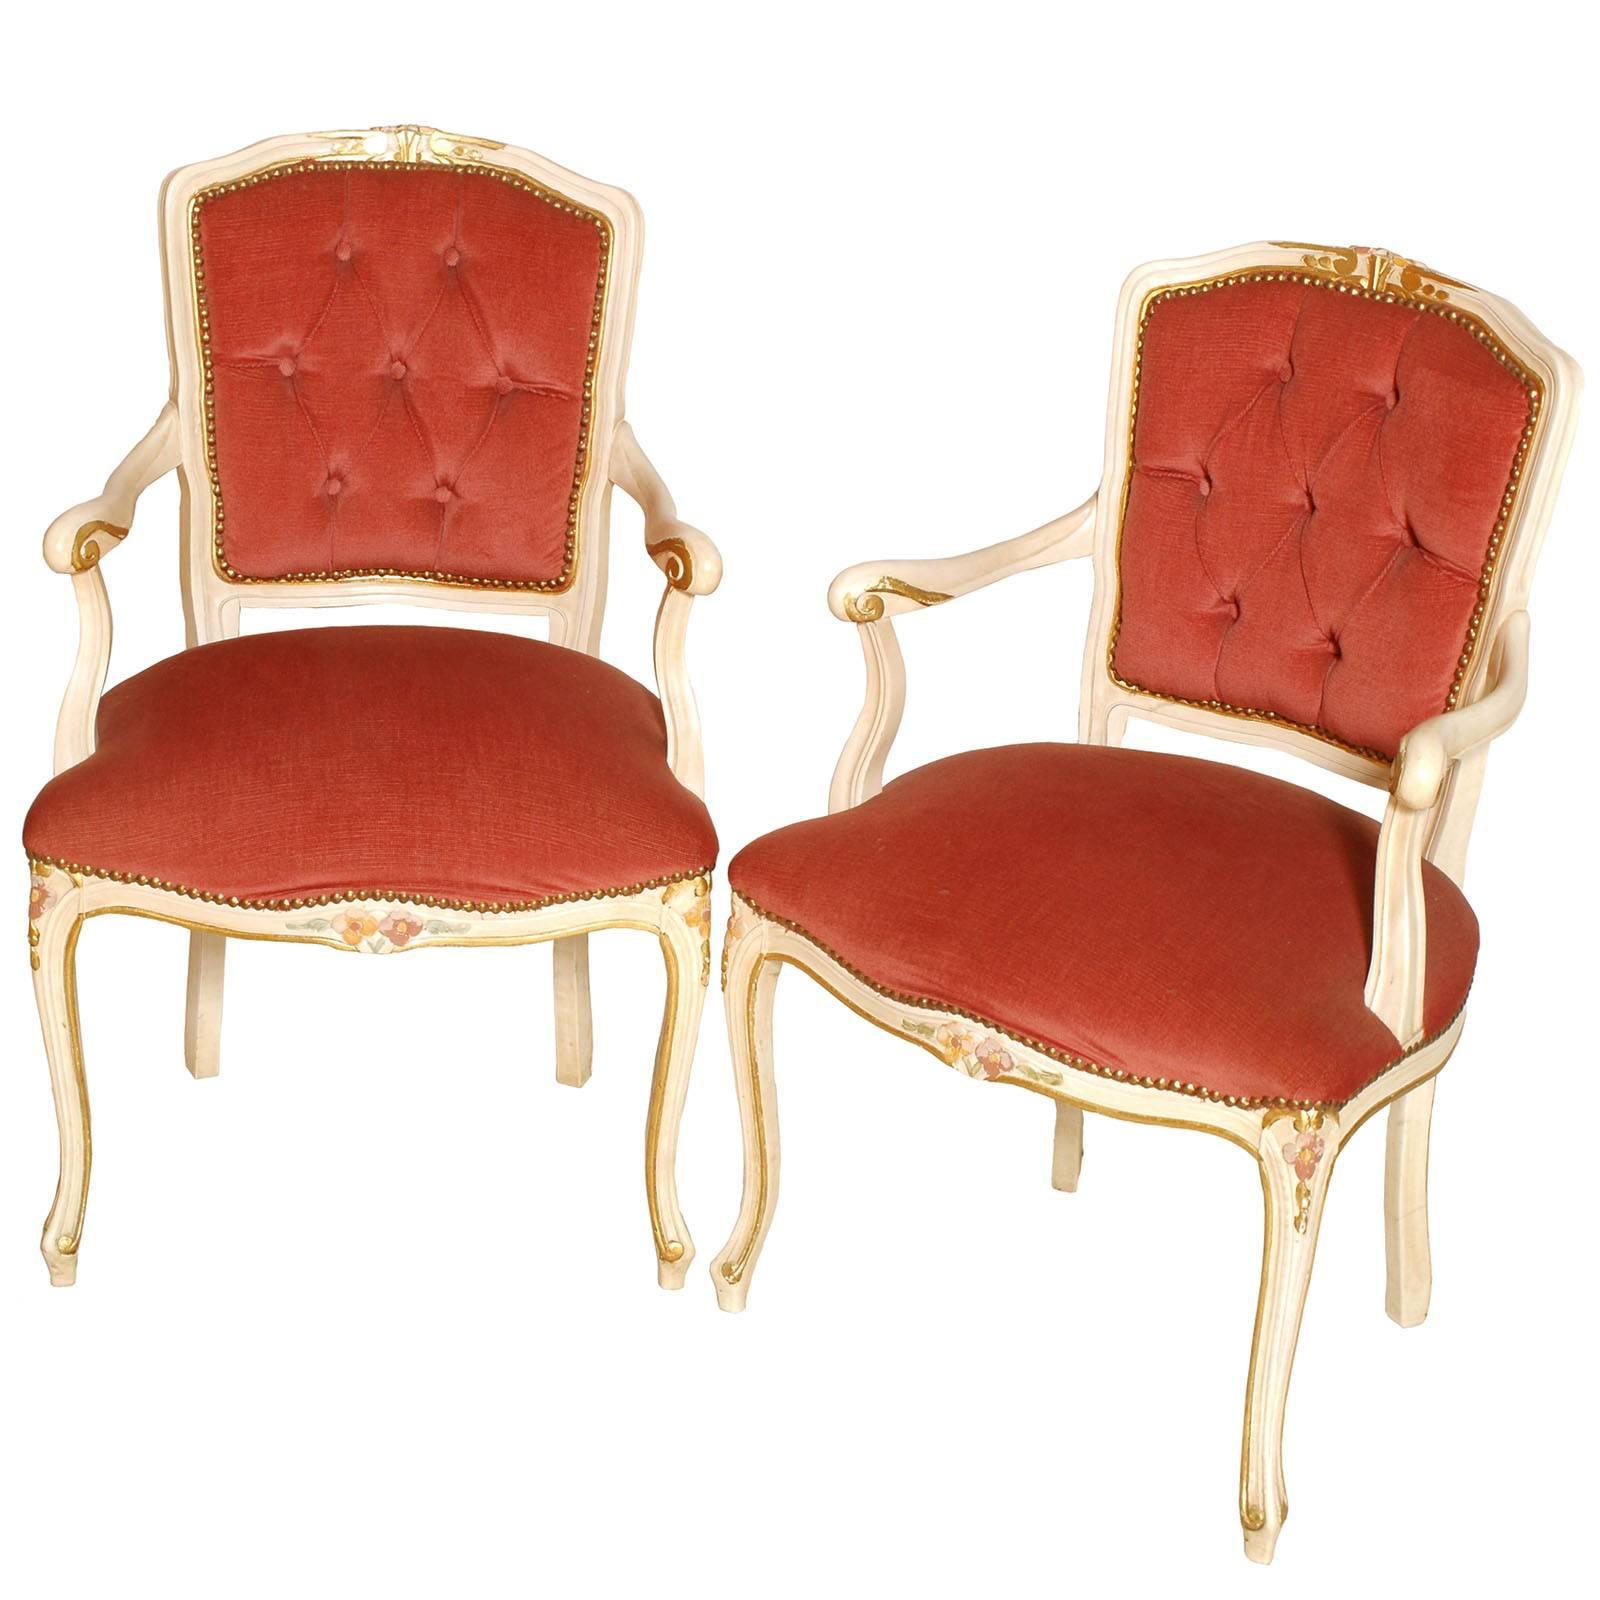 Early 20th Century Venetian Baroque Armchairs, Lacquered Pink Velvet Upholstered For Sale